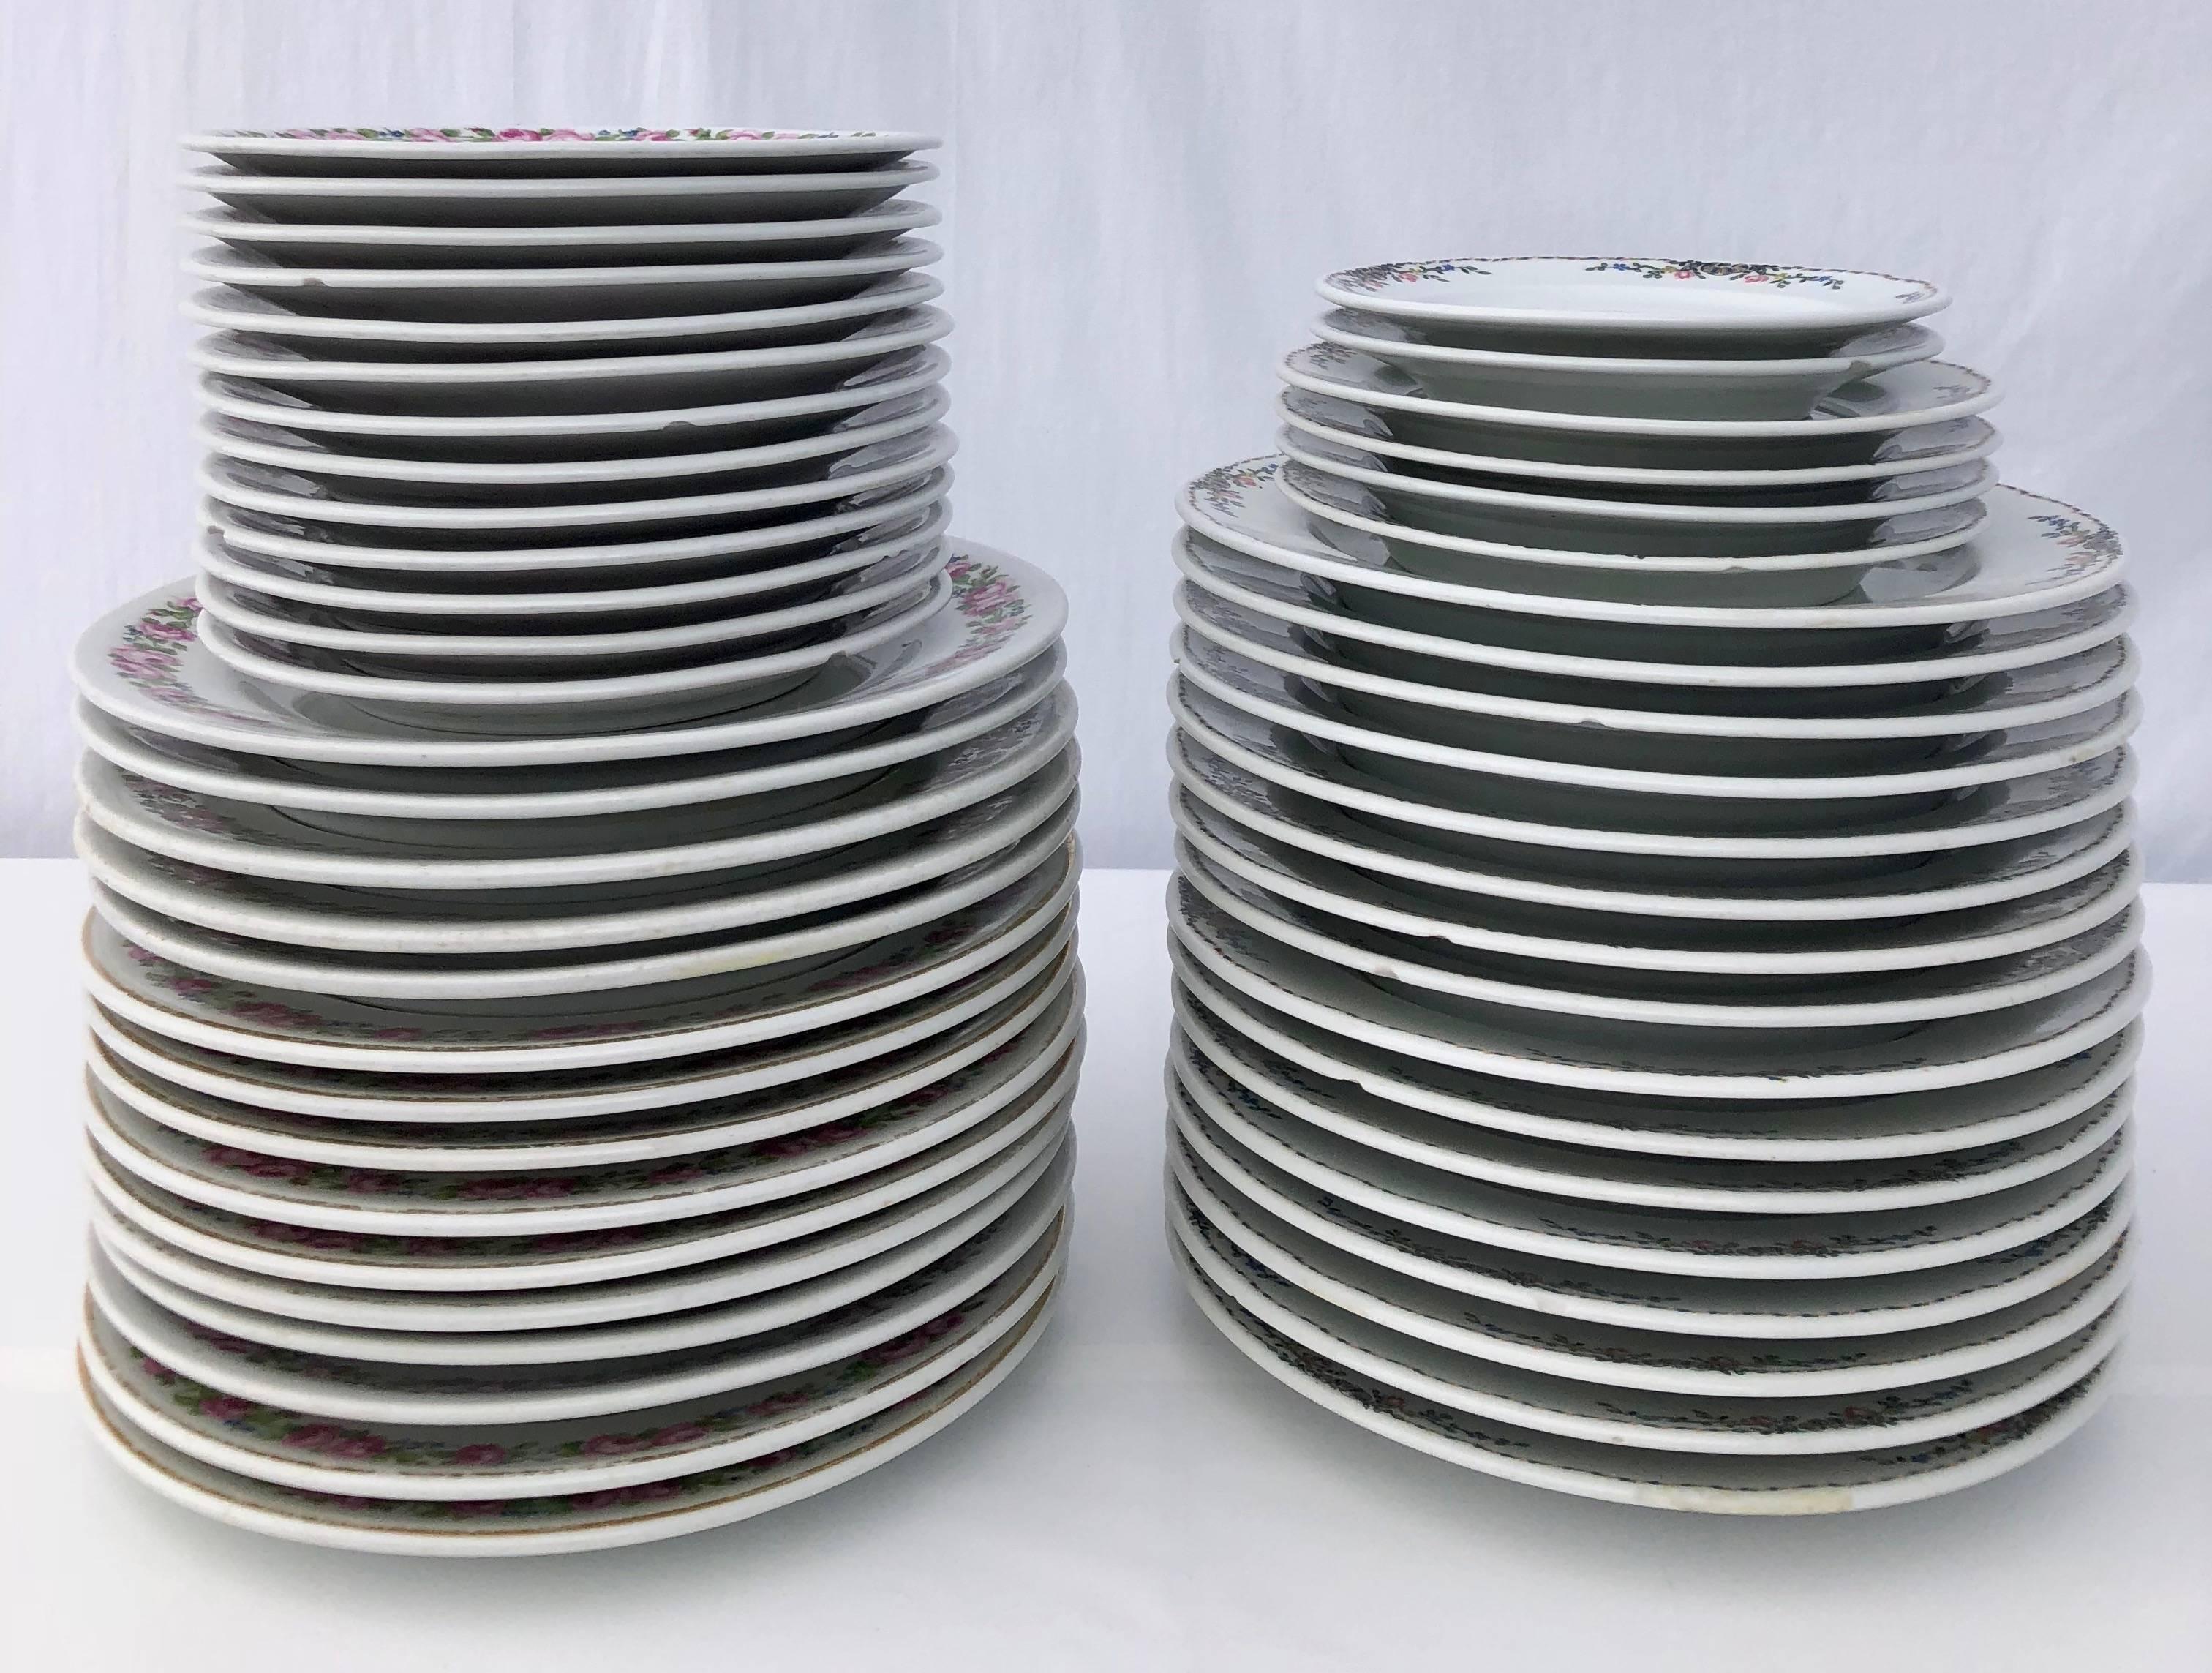 This is a set of 50 French plates by Havilland and Bernardaud, Limoges. Both sets are white with a floral design. They were used in a famous two Michelin star restaurant in Paris and are made of wicker porcelain, a sturdier porcelain for